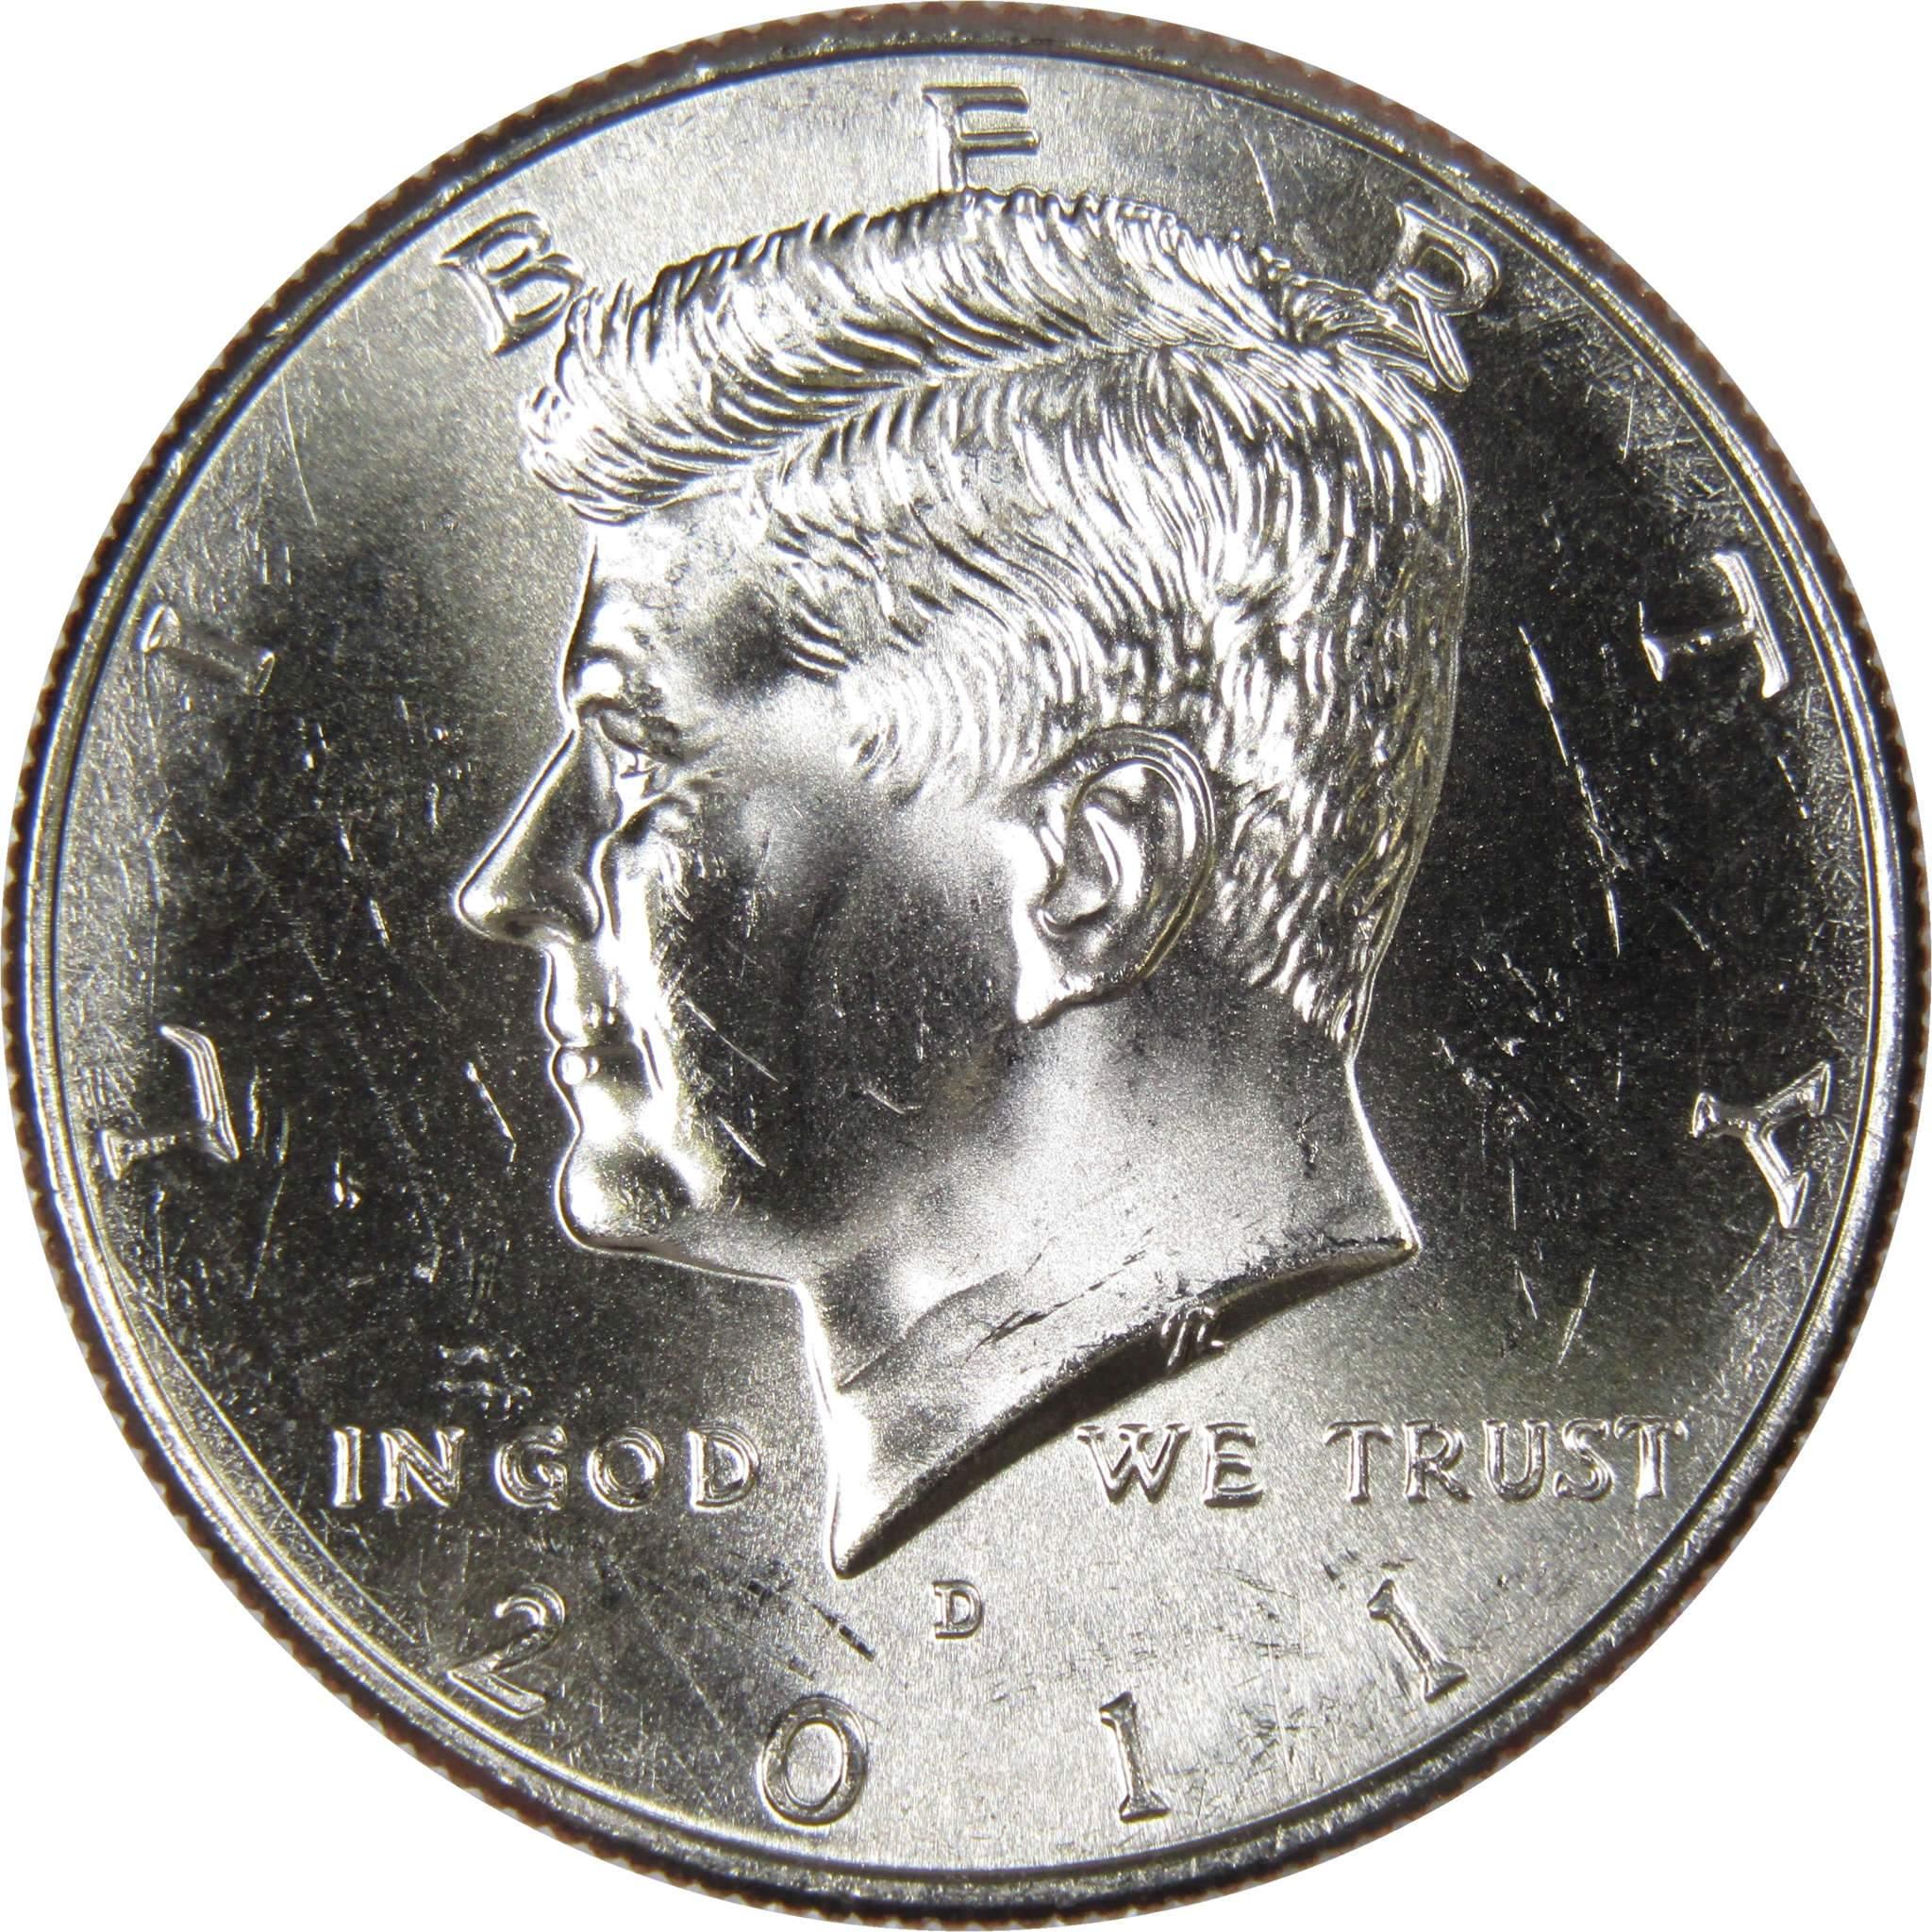 2011 D Kennedy Half Dollar BU Uncirculated Mint State 50c US Coin Collectible